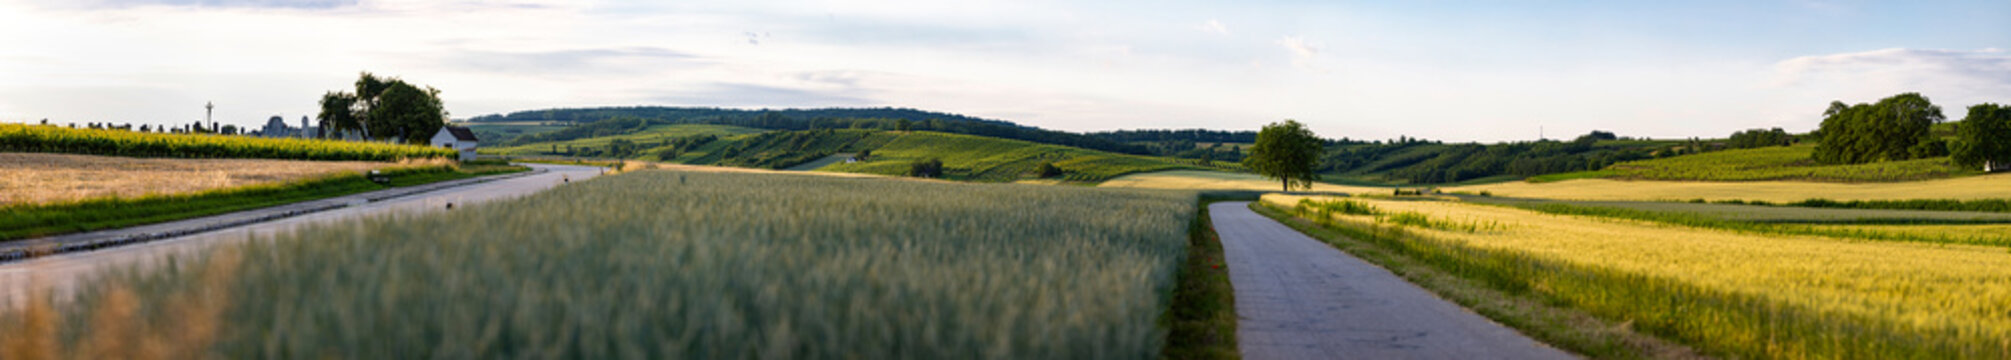 super wide panorama of lower austria with road forest and fields